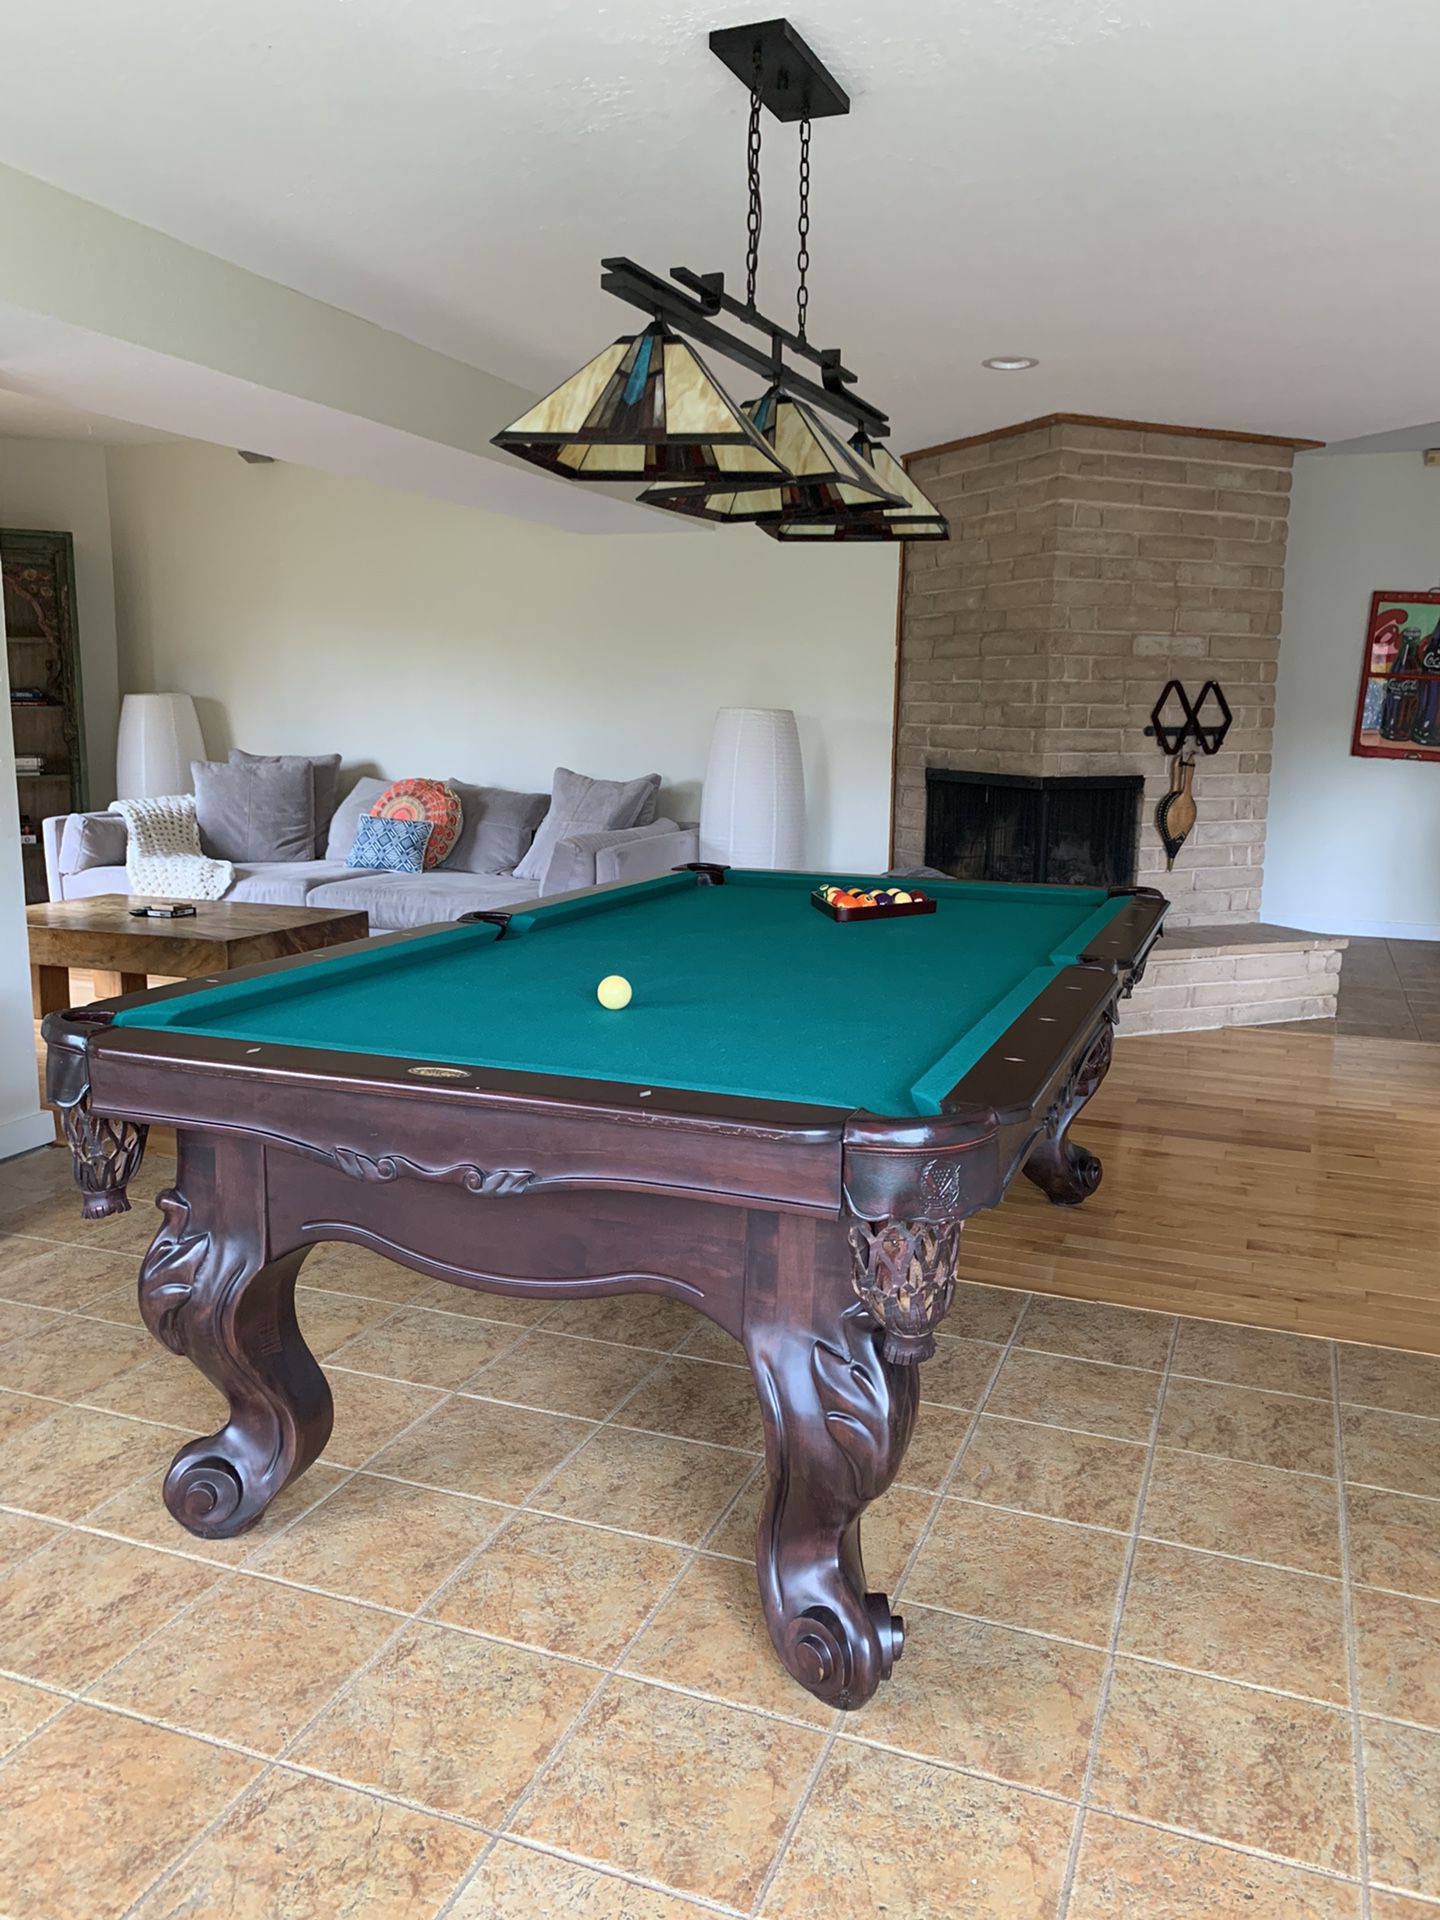 Connelly Scottsdale 7’ Pool Table! 